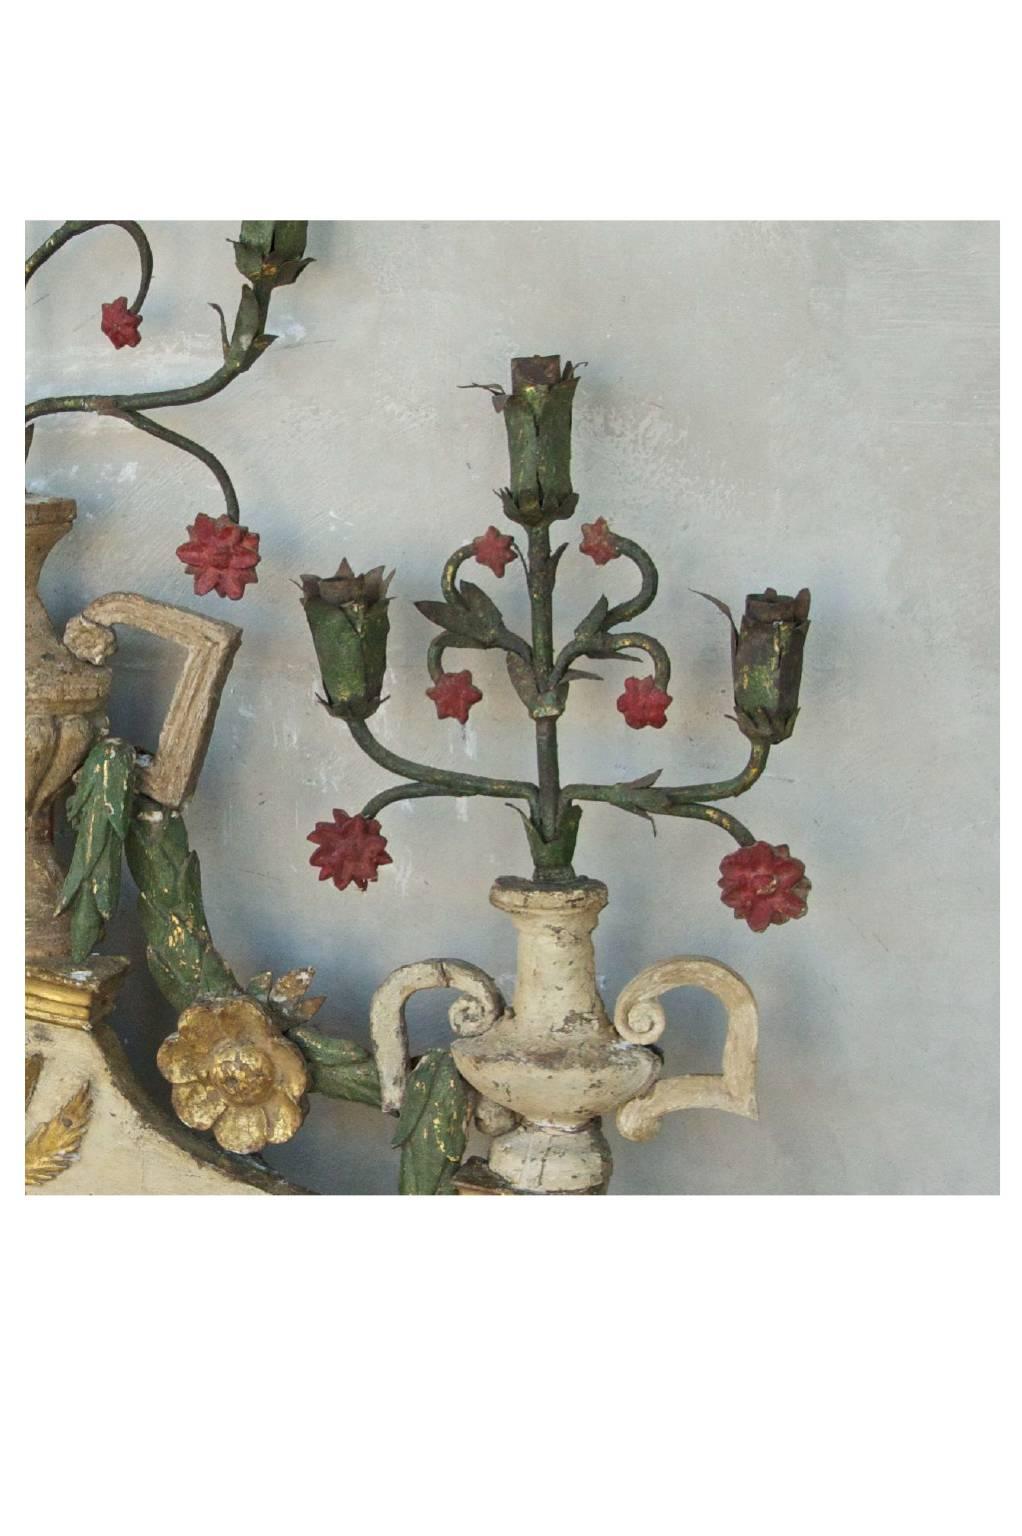 These 17th century sacristy elements from a chapel in Rome, Italy are a very special find. They are a matching pair with intricate carving and vibrant colors. They are a great size to display on any wall. They have gold detailing as well. 